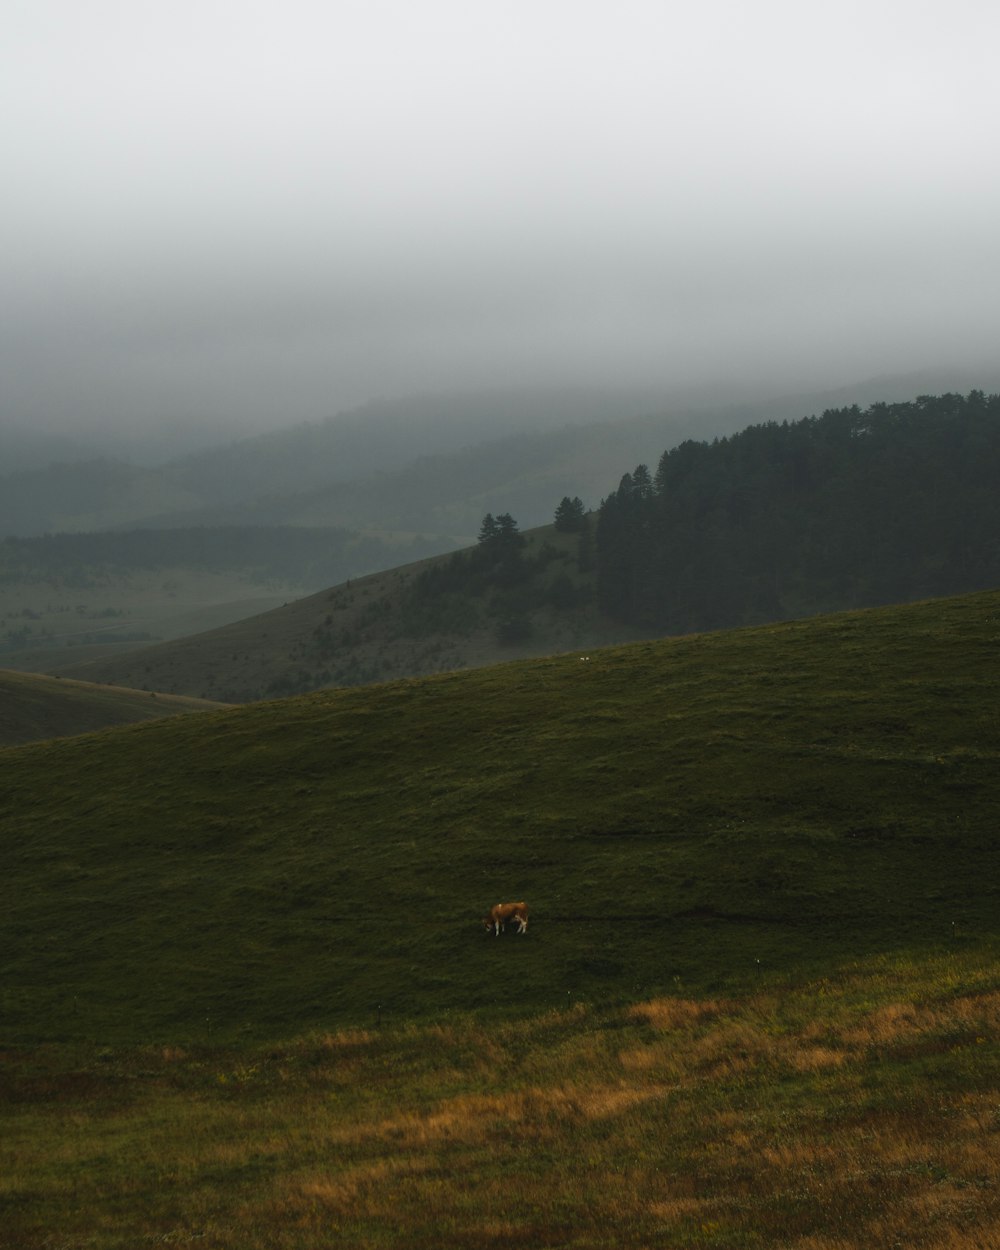 two cows grazing in a field on a foggy day